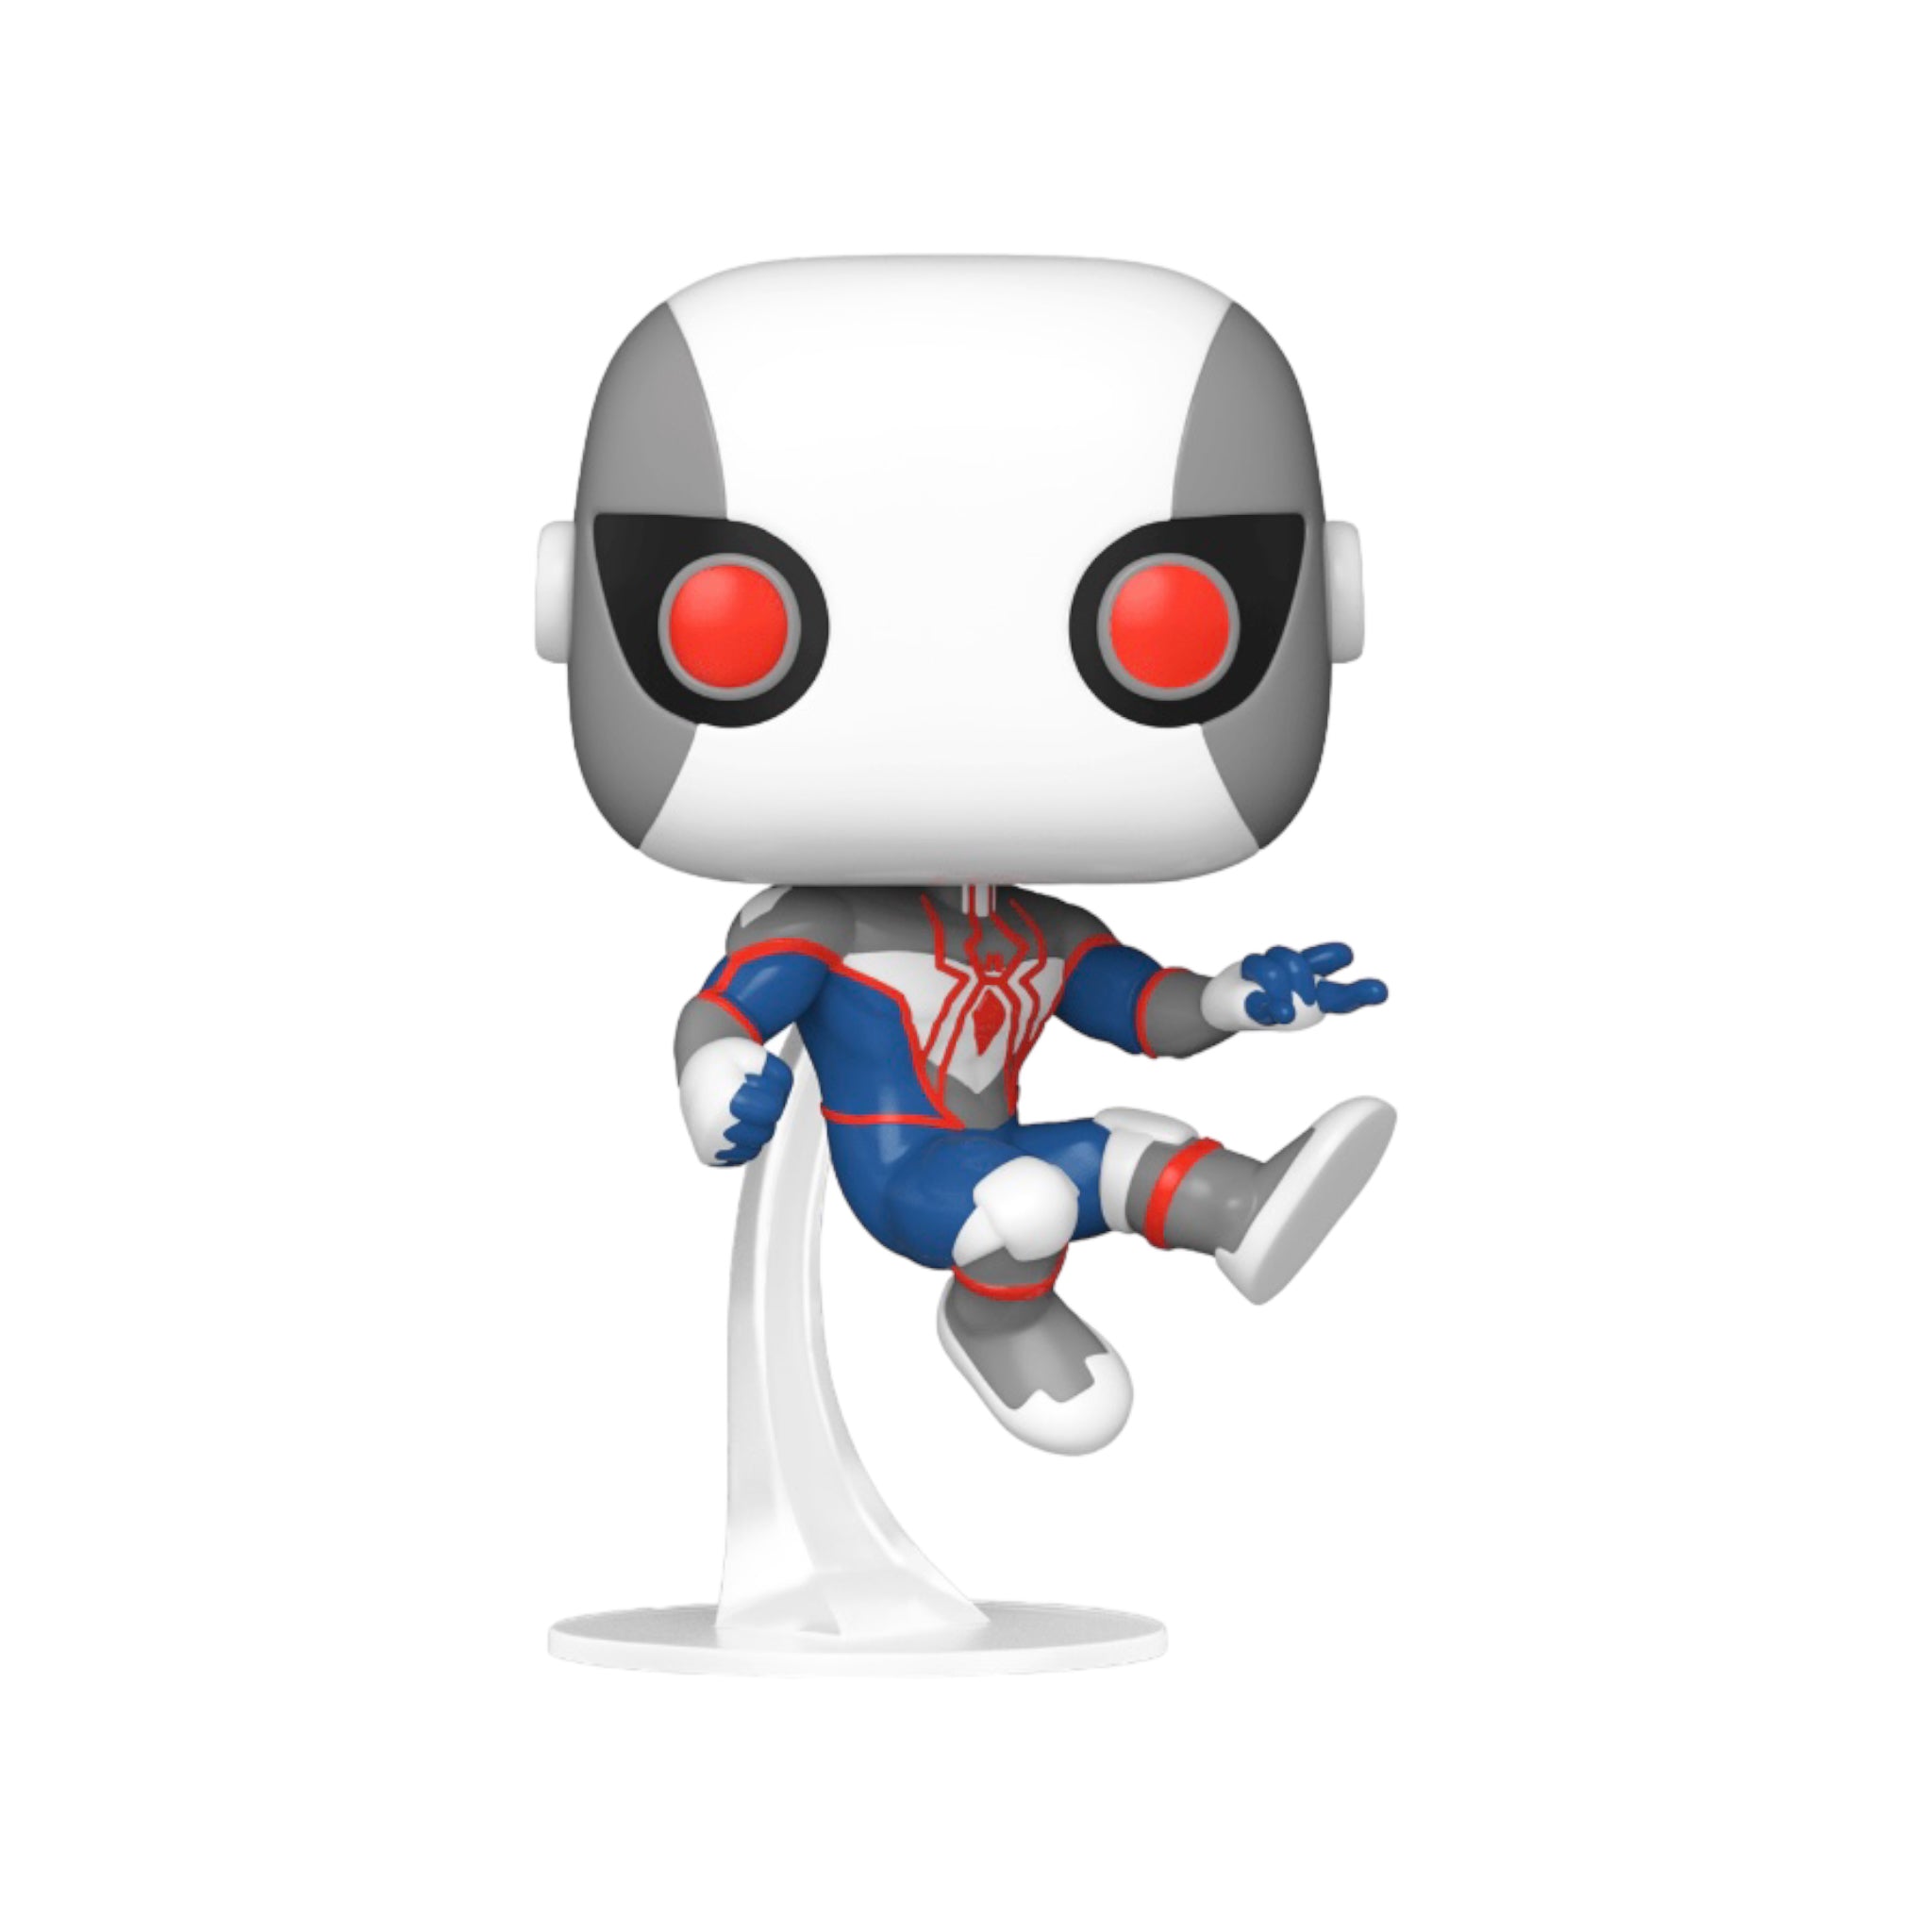 Spider-Man (Bug-Eyes Armor) #1067 Funko Pop! - Marvel - CCXP 2022 Shared Exclusive